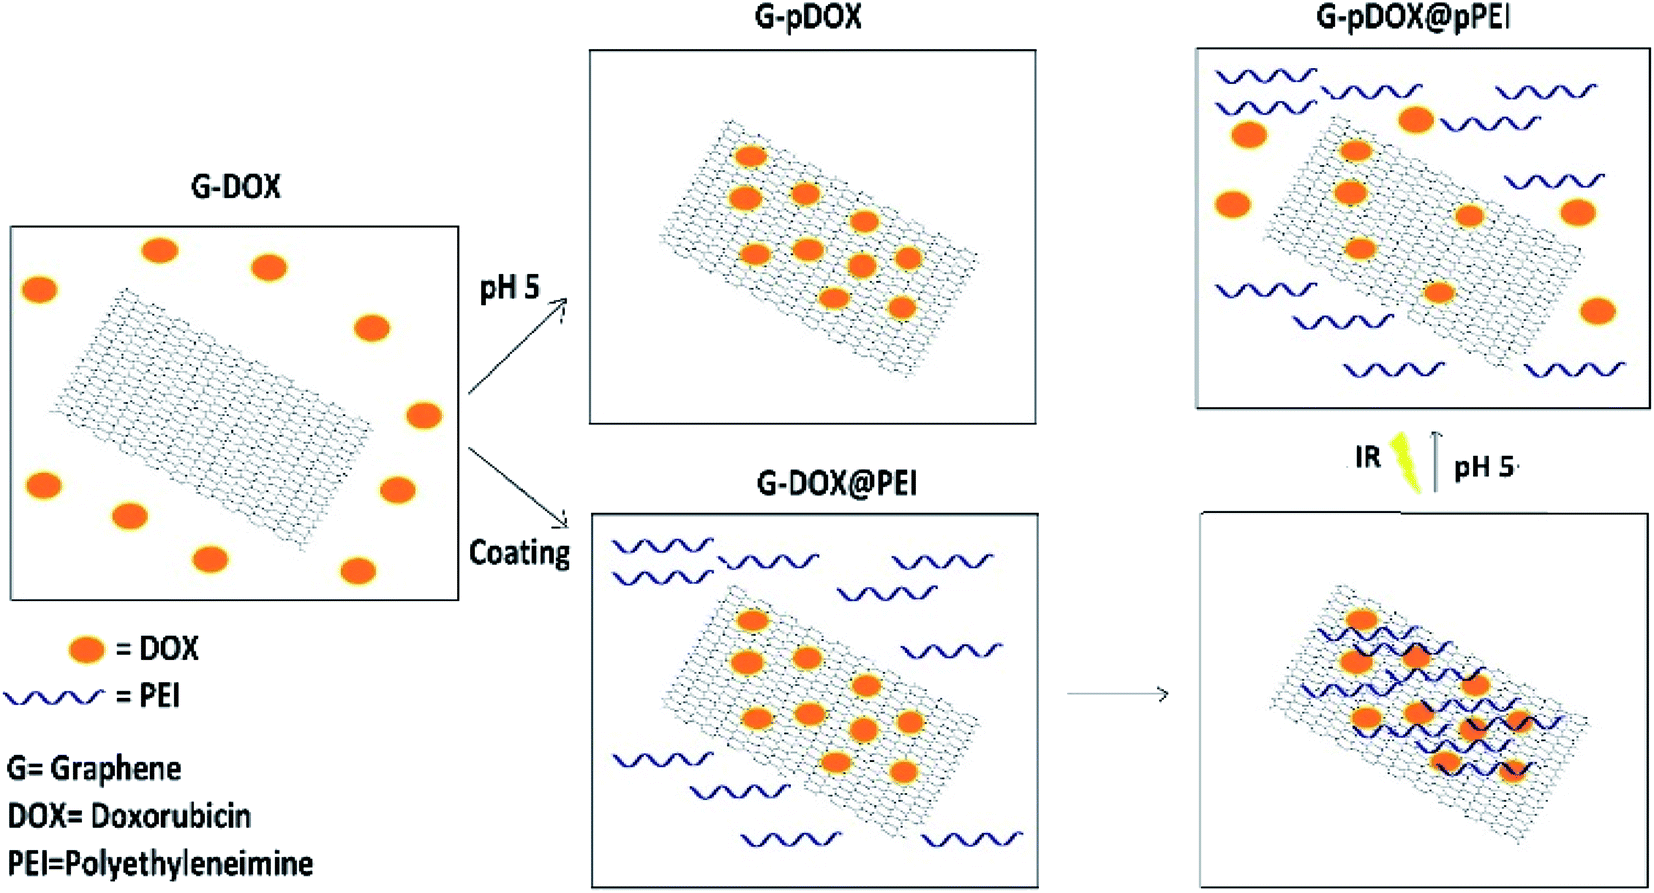 Development And Evaluation Of A Ph Responsive And Water Soluble Drug Delivery System Based On Smart Polymer Coating Of Graphene Nanosheets An In Silico Study Rsc Advances Rsc Publishing